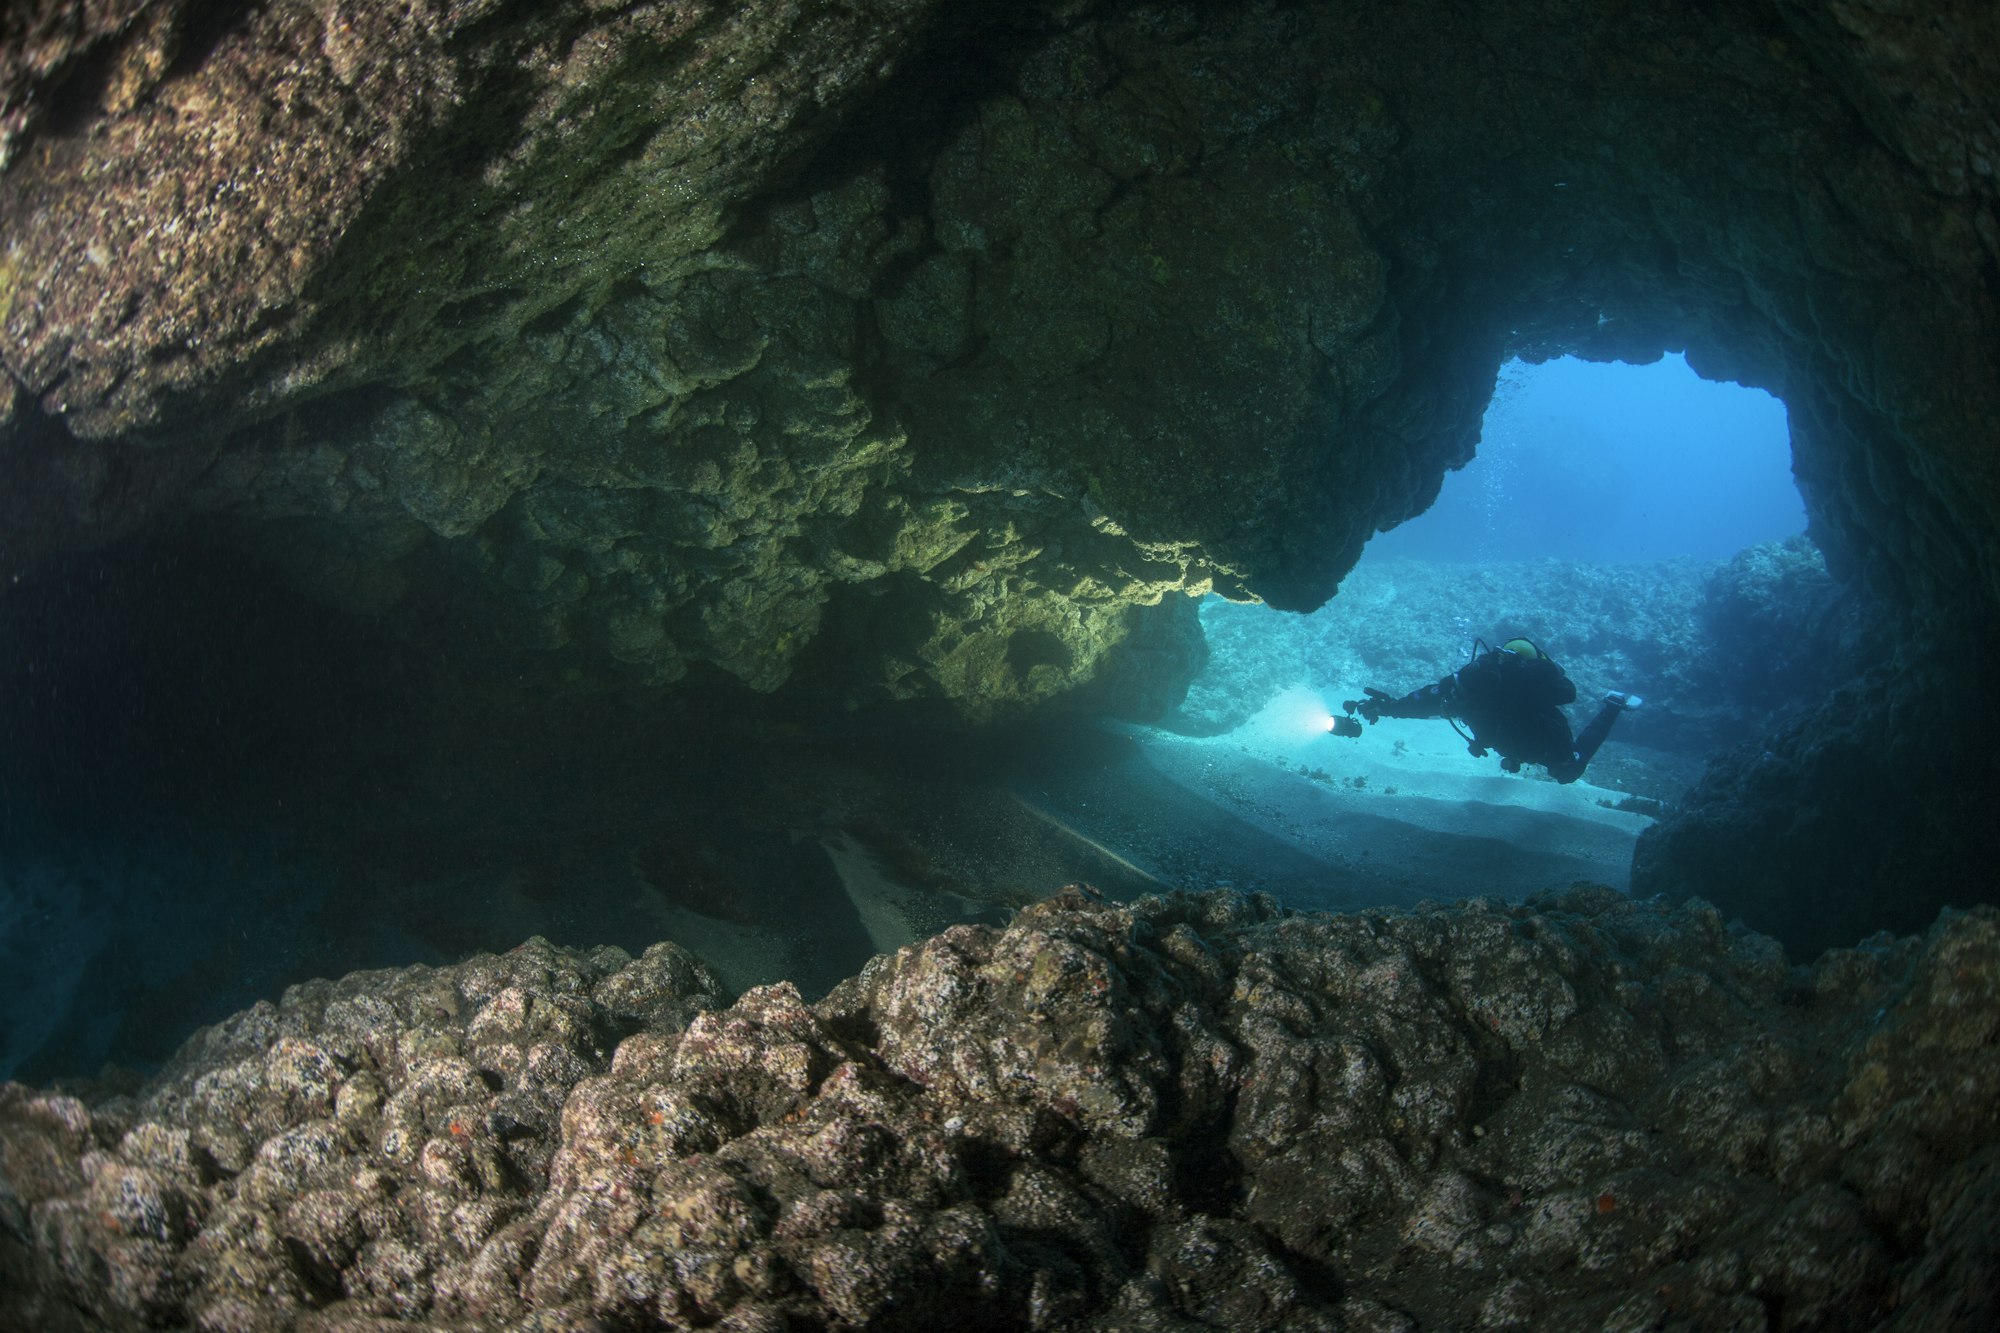 Silhouetted Scuba Diver Enters an Underwater Cavern